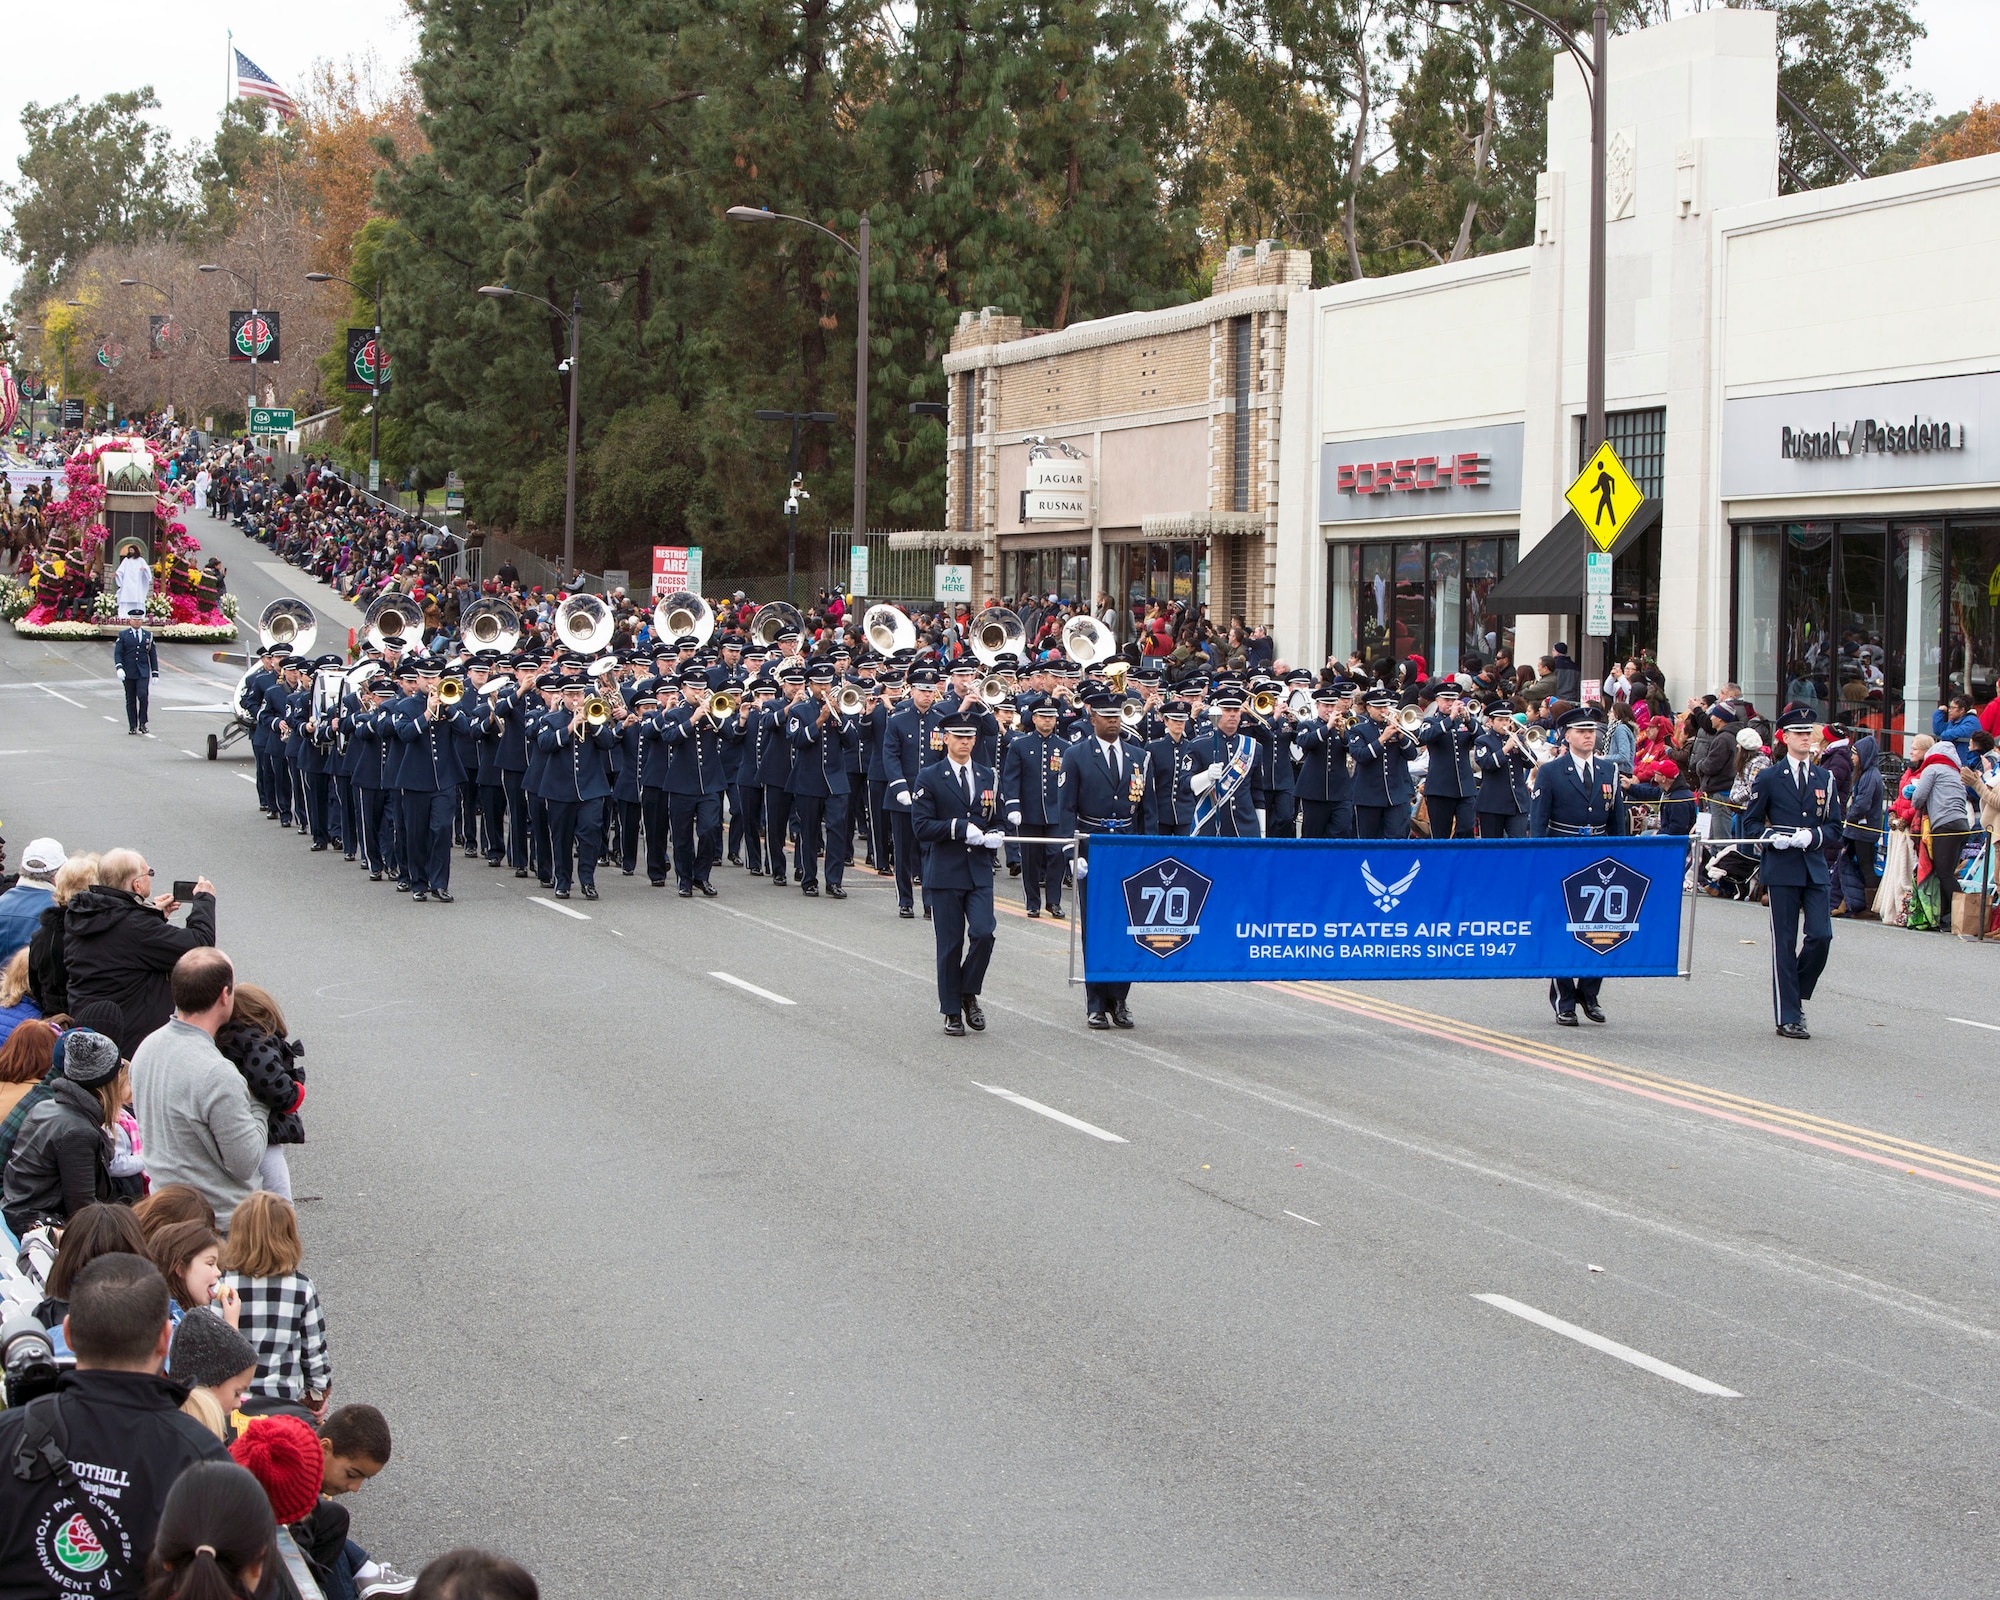 The United States Air Force Total Force Band performs in the 128th Rose Parade in Pasadena, Calif., Jan. 2, 2017. The USAF Total Force Band kicked off the Air Force 70th Birthday celebration playing several venues in Southern California culminating with their appearance in the Rose Parade. The band is comprised of active-duty and Air National Guard musicians from around the Air Force. (U.S. Air Force photo/Louis Briscese)